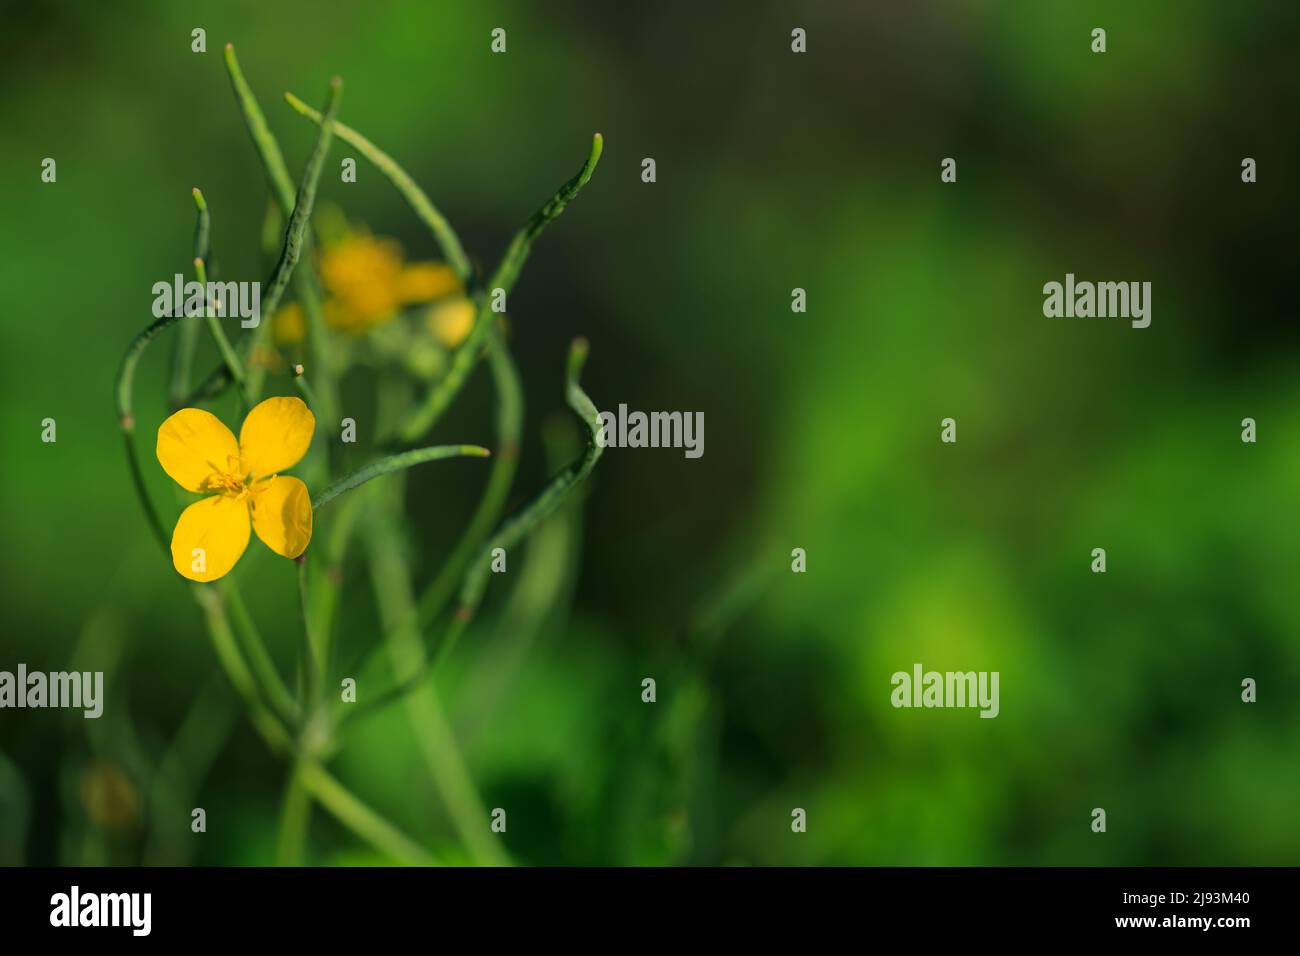 Flowers of yellow flowers of plant Chelidonium majus. Copy-space for text, blurred background. Stock Photo